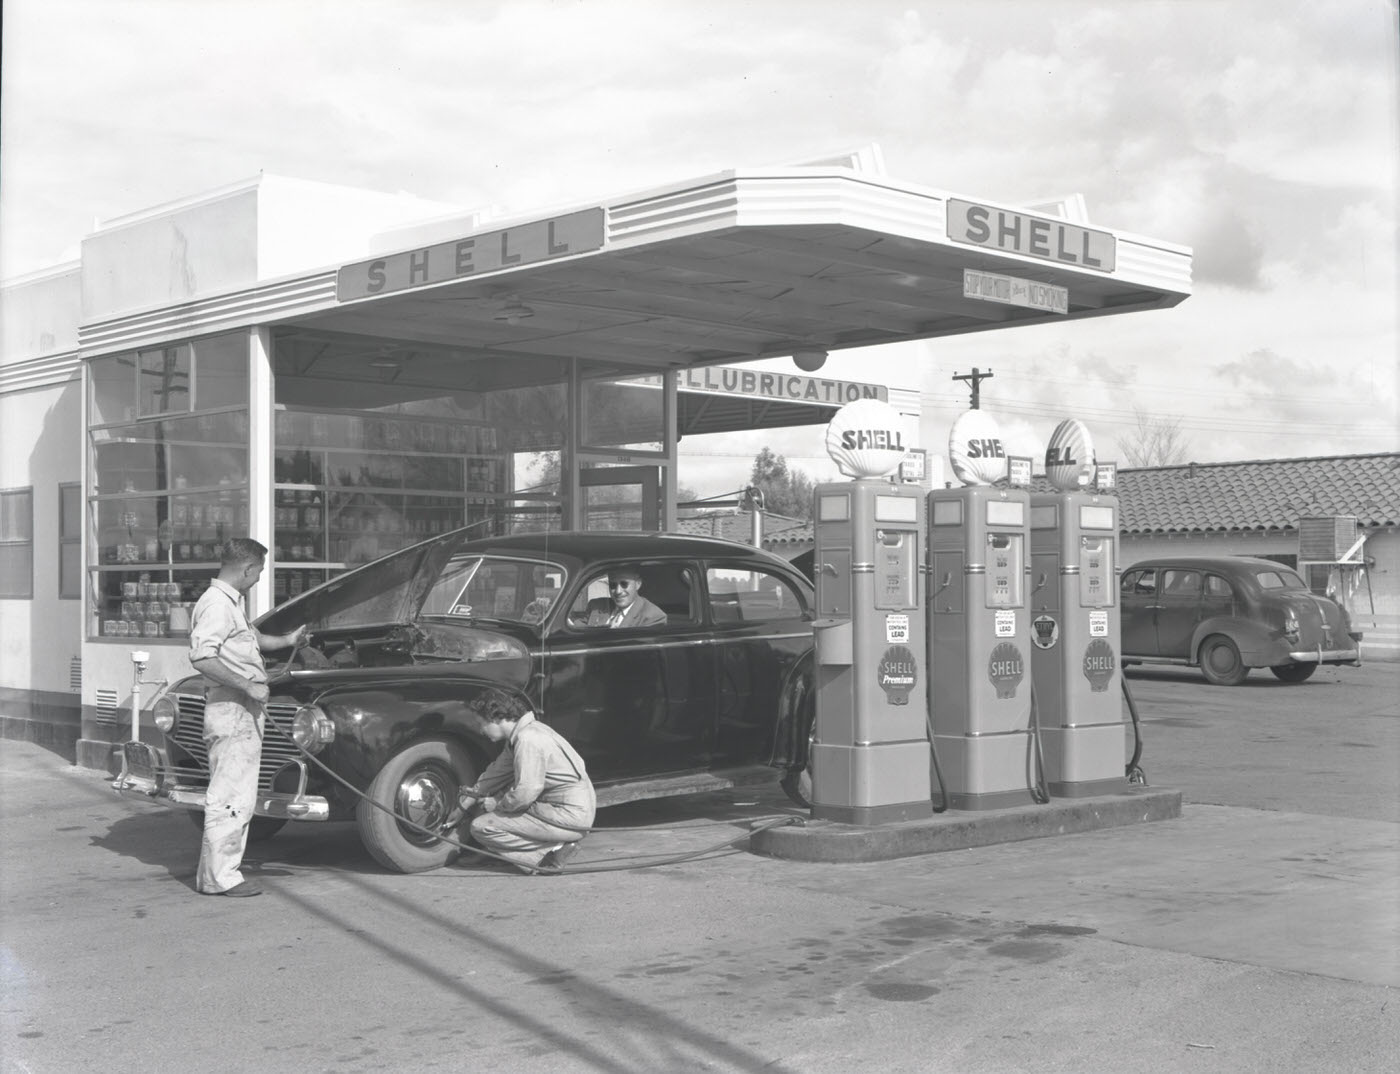 Shell Oil Co. Service Station Exterior, 1944